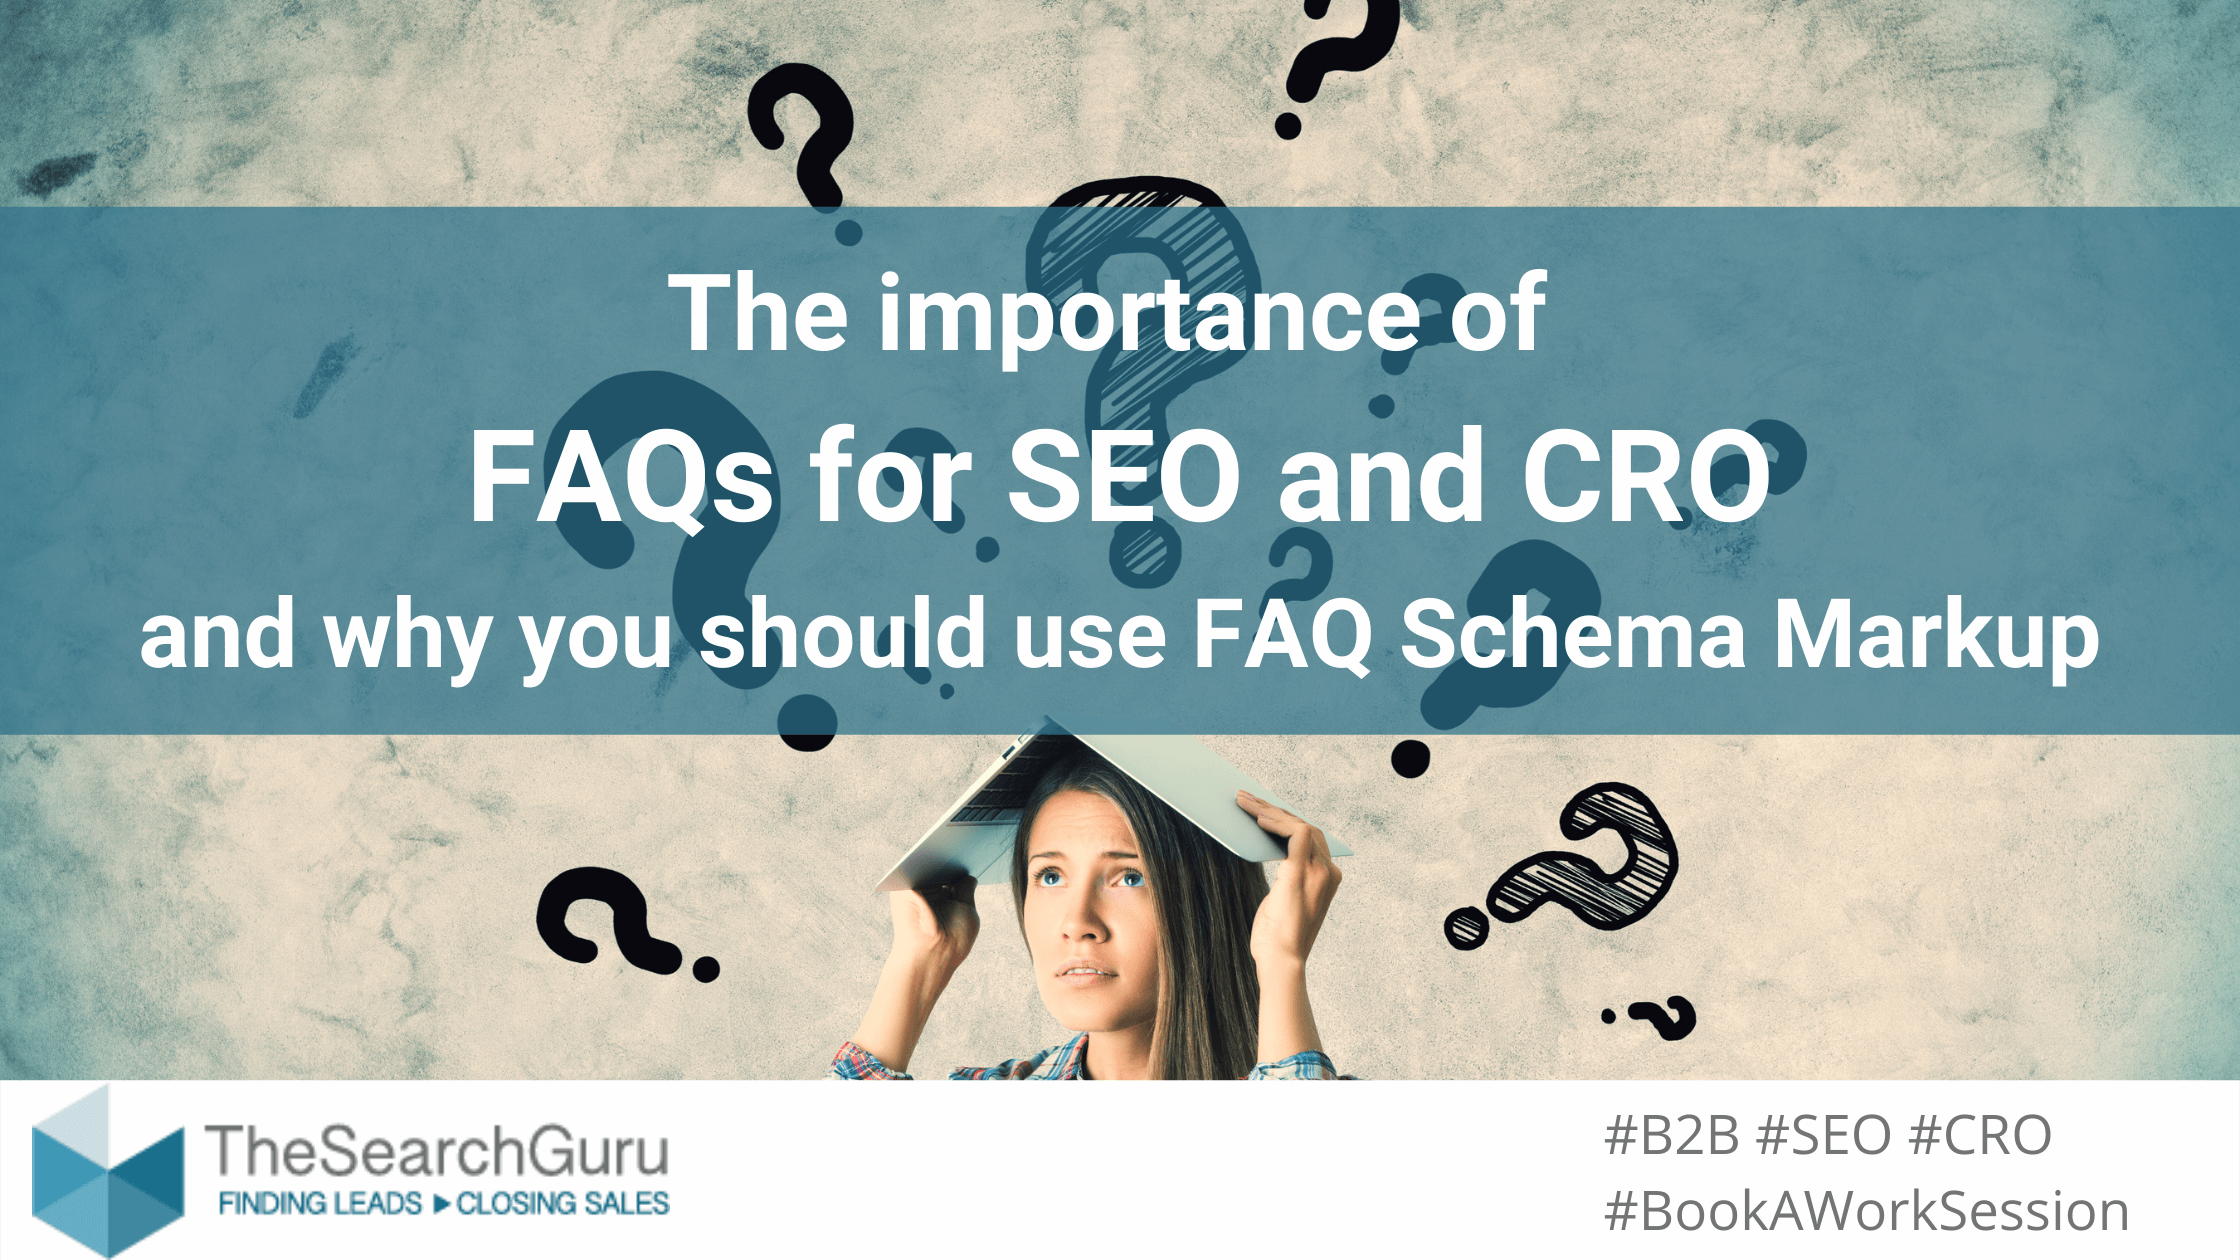 FAQs for SEO and CRO